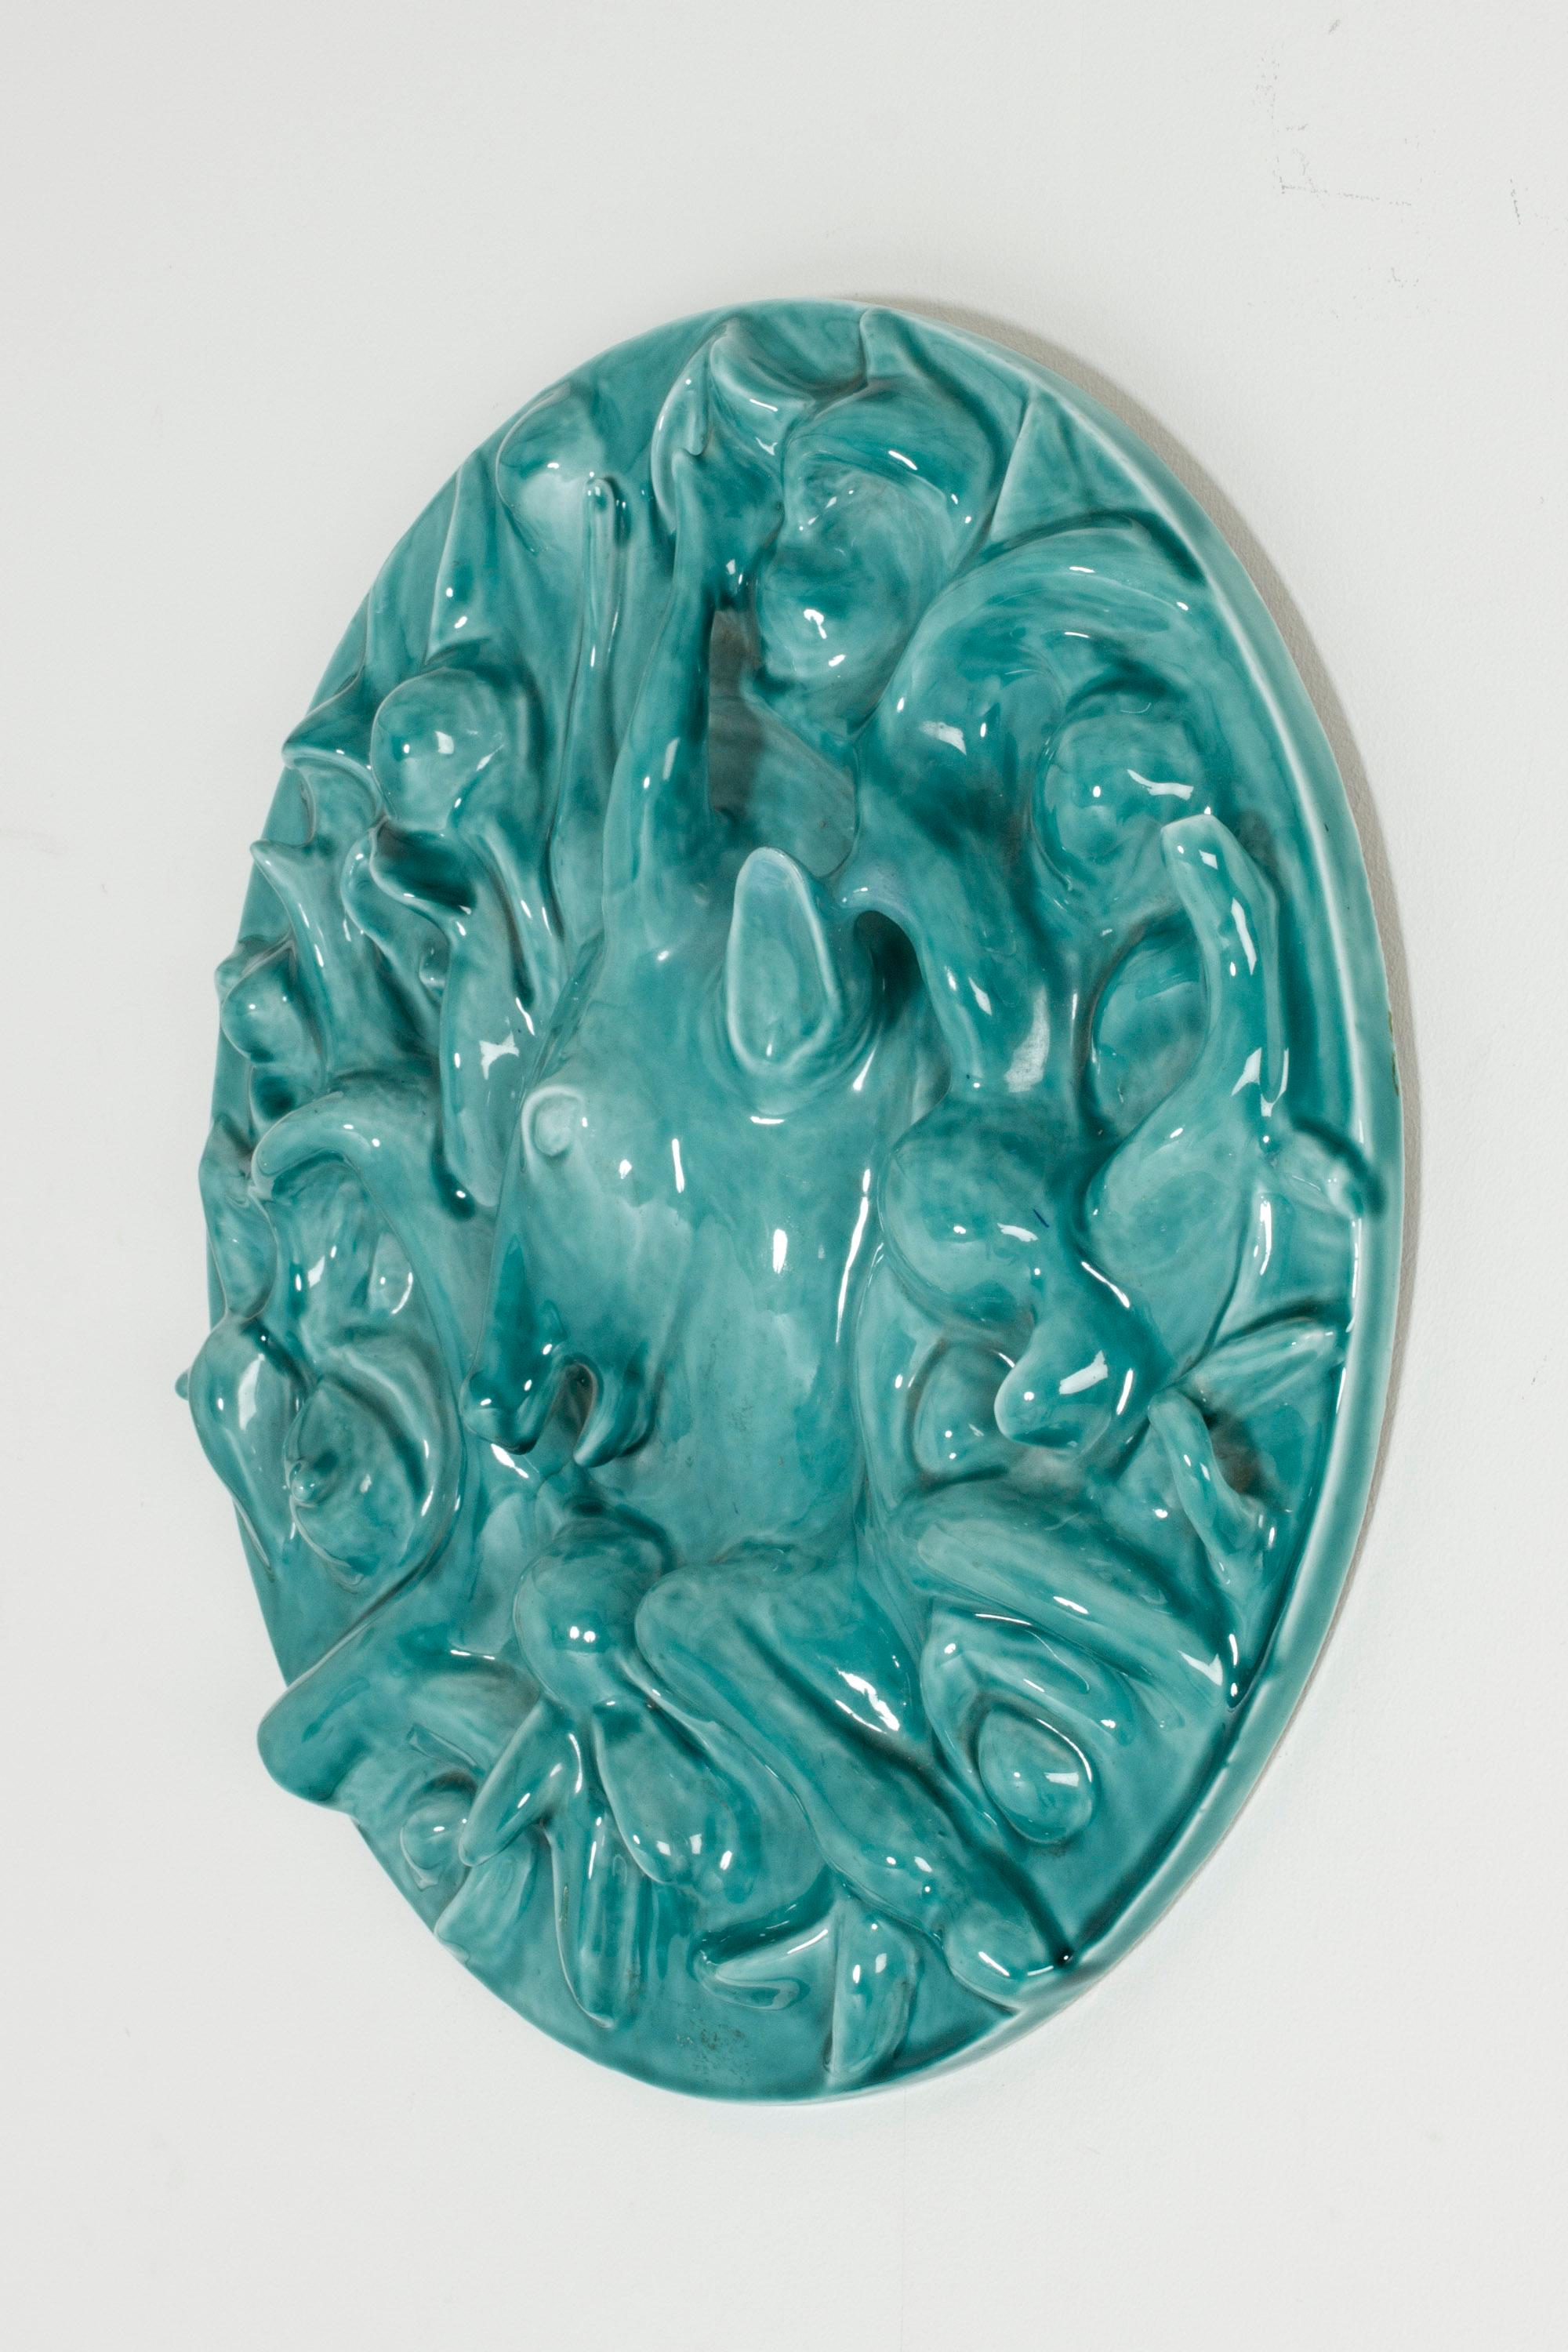 Striking stoneware wall relief by Axel Salto. Large round shape with motif of a deer in foliage, preparing to take a bite of an apple. Beautiful aquamarine glaze.